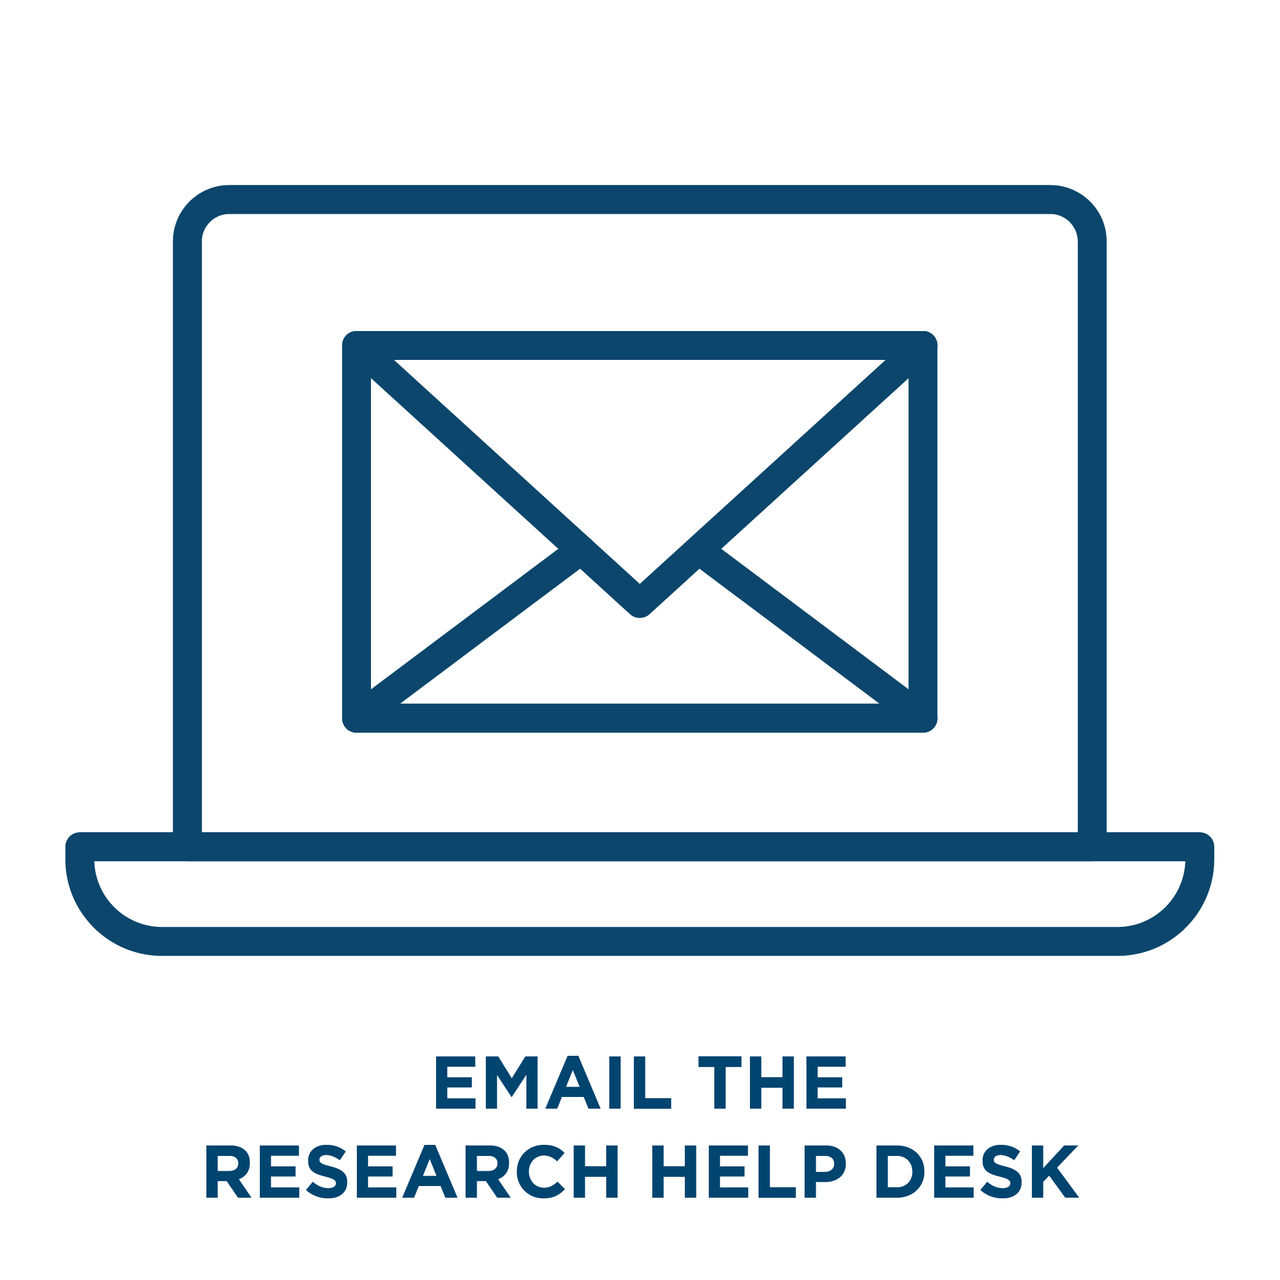 Email the research help desk